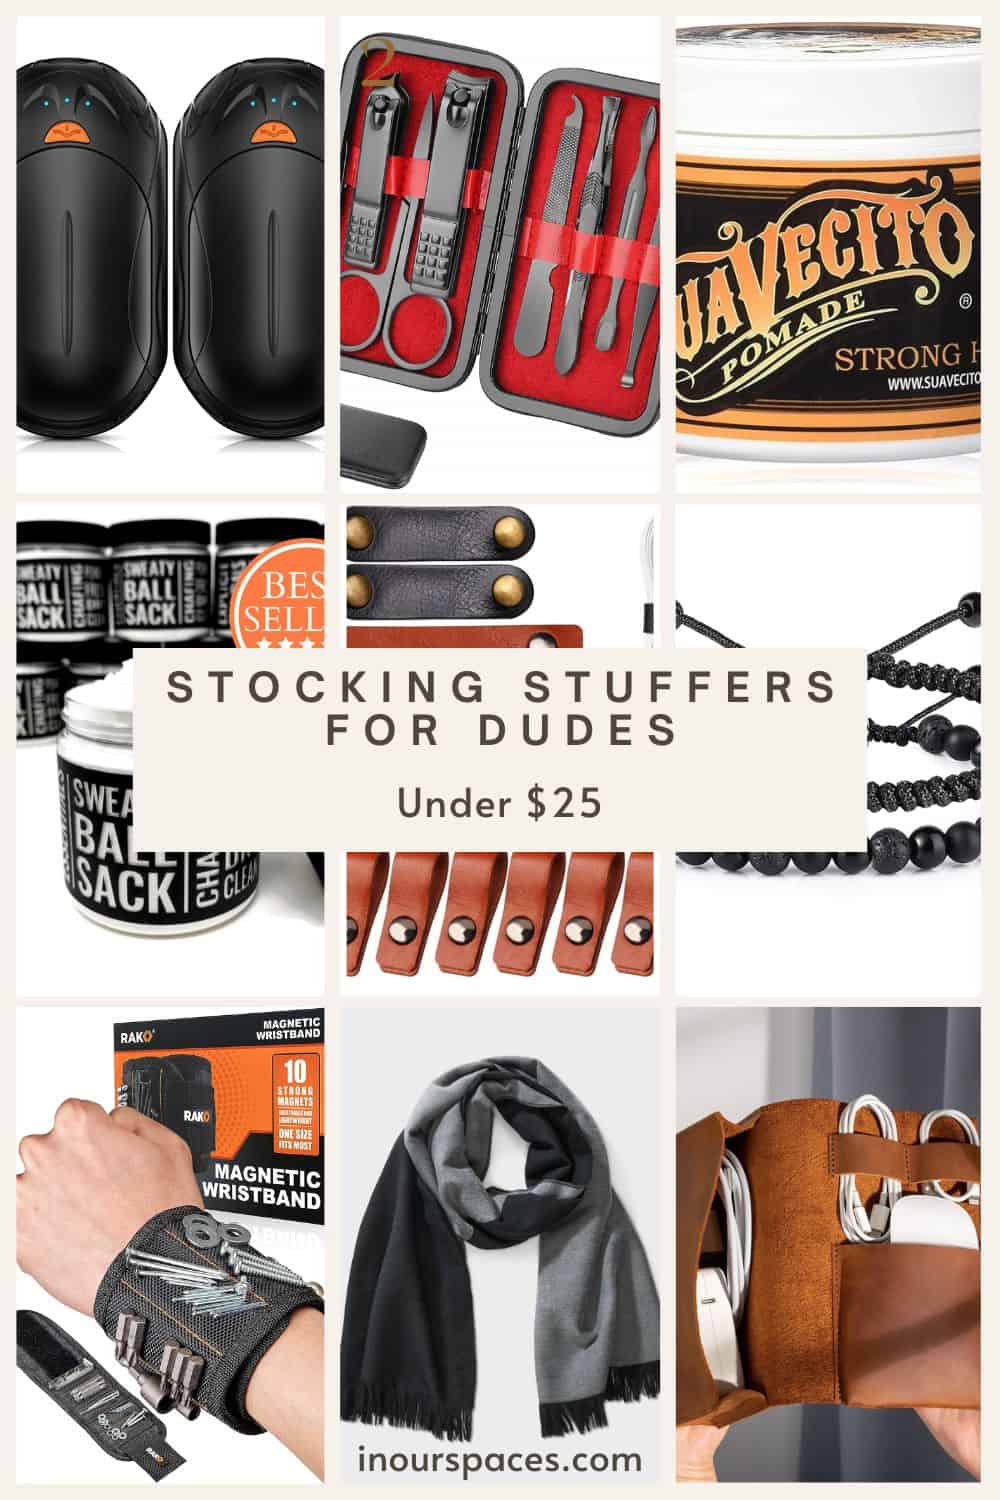 9 Stocking Stuffers For Dudes (For a Steal!)